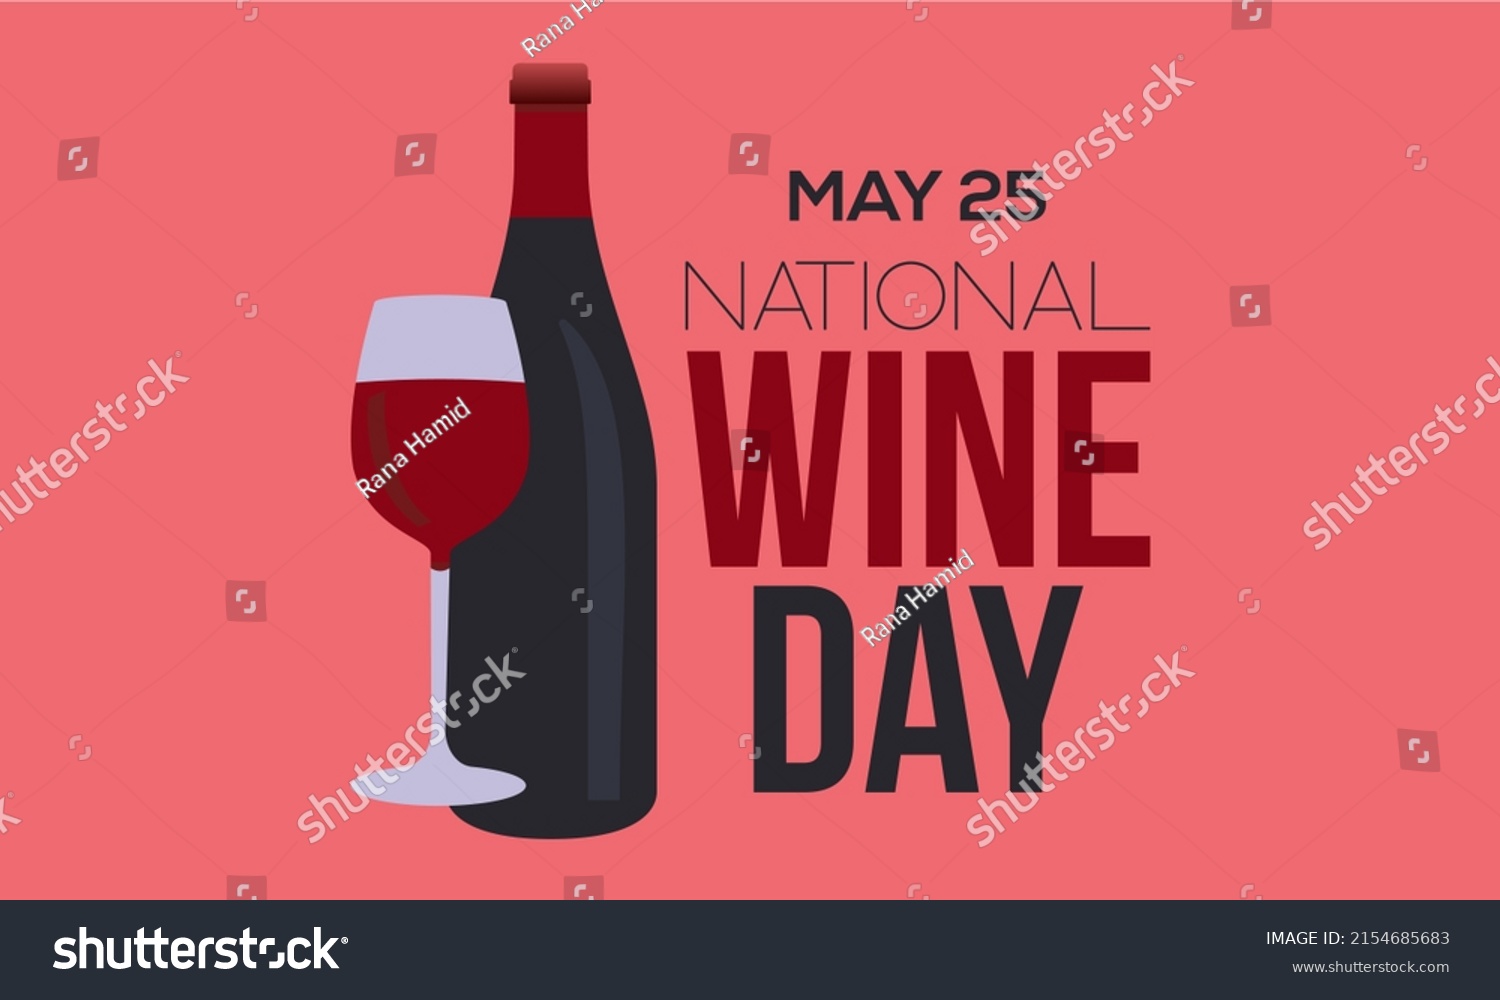 National Wine Day May Holiday Concept Stock Vector Royalty Free 2154685683 Shutterstock 2815